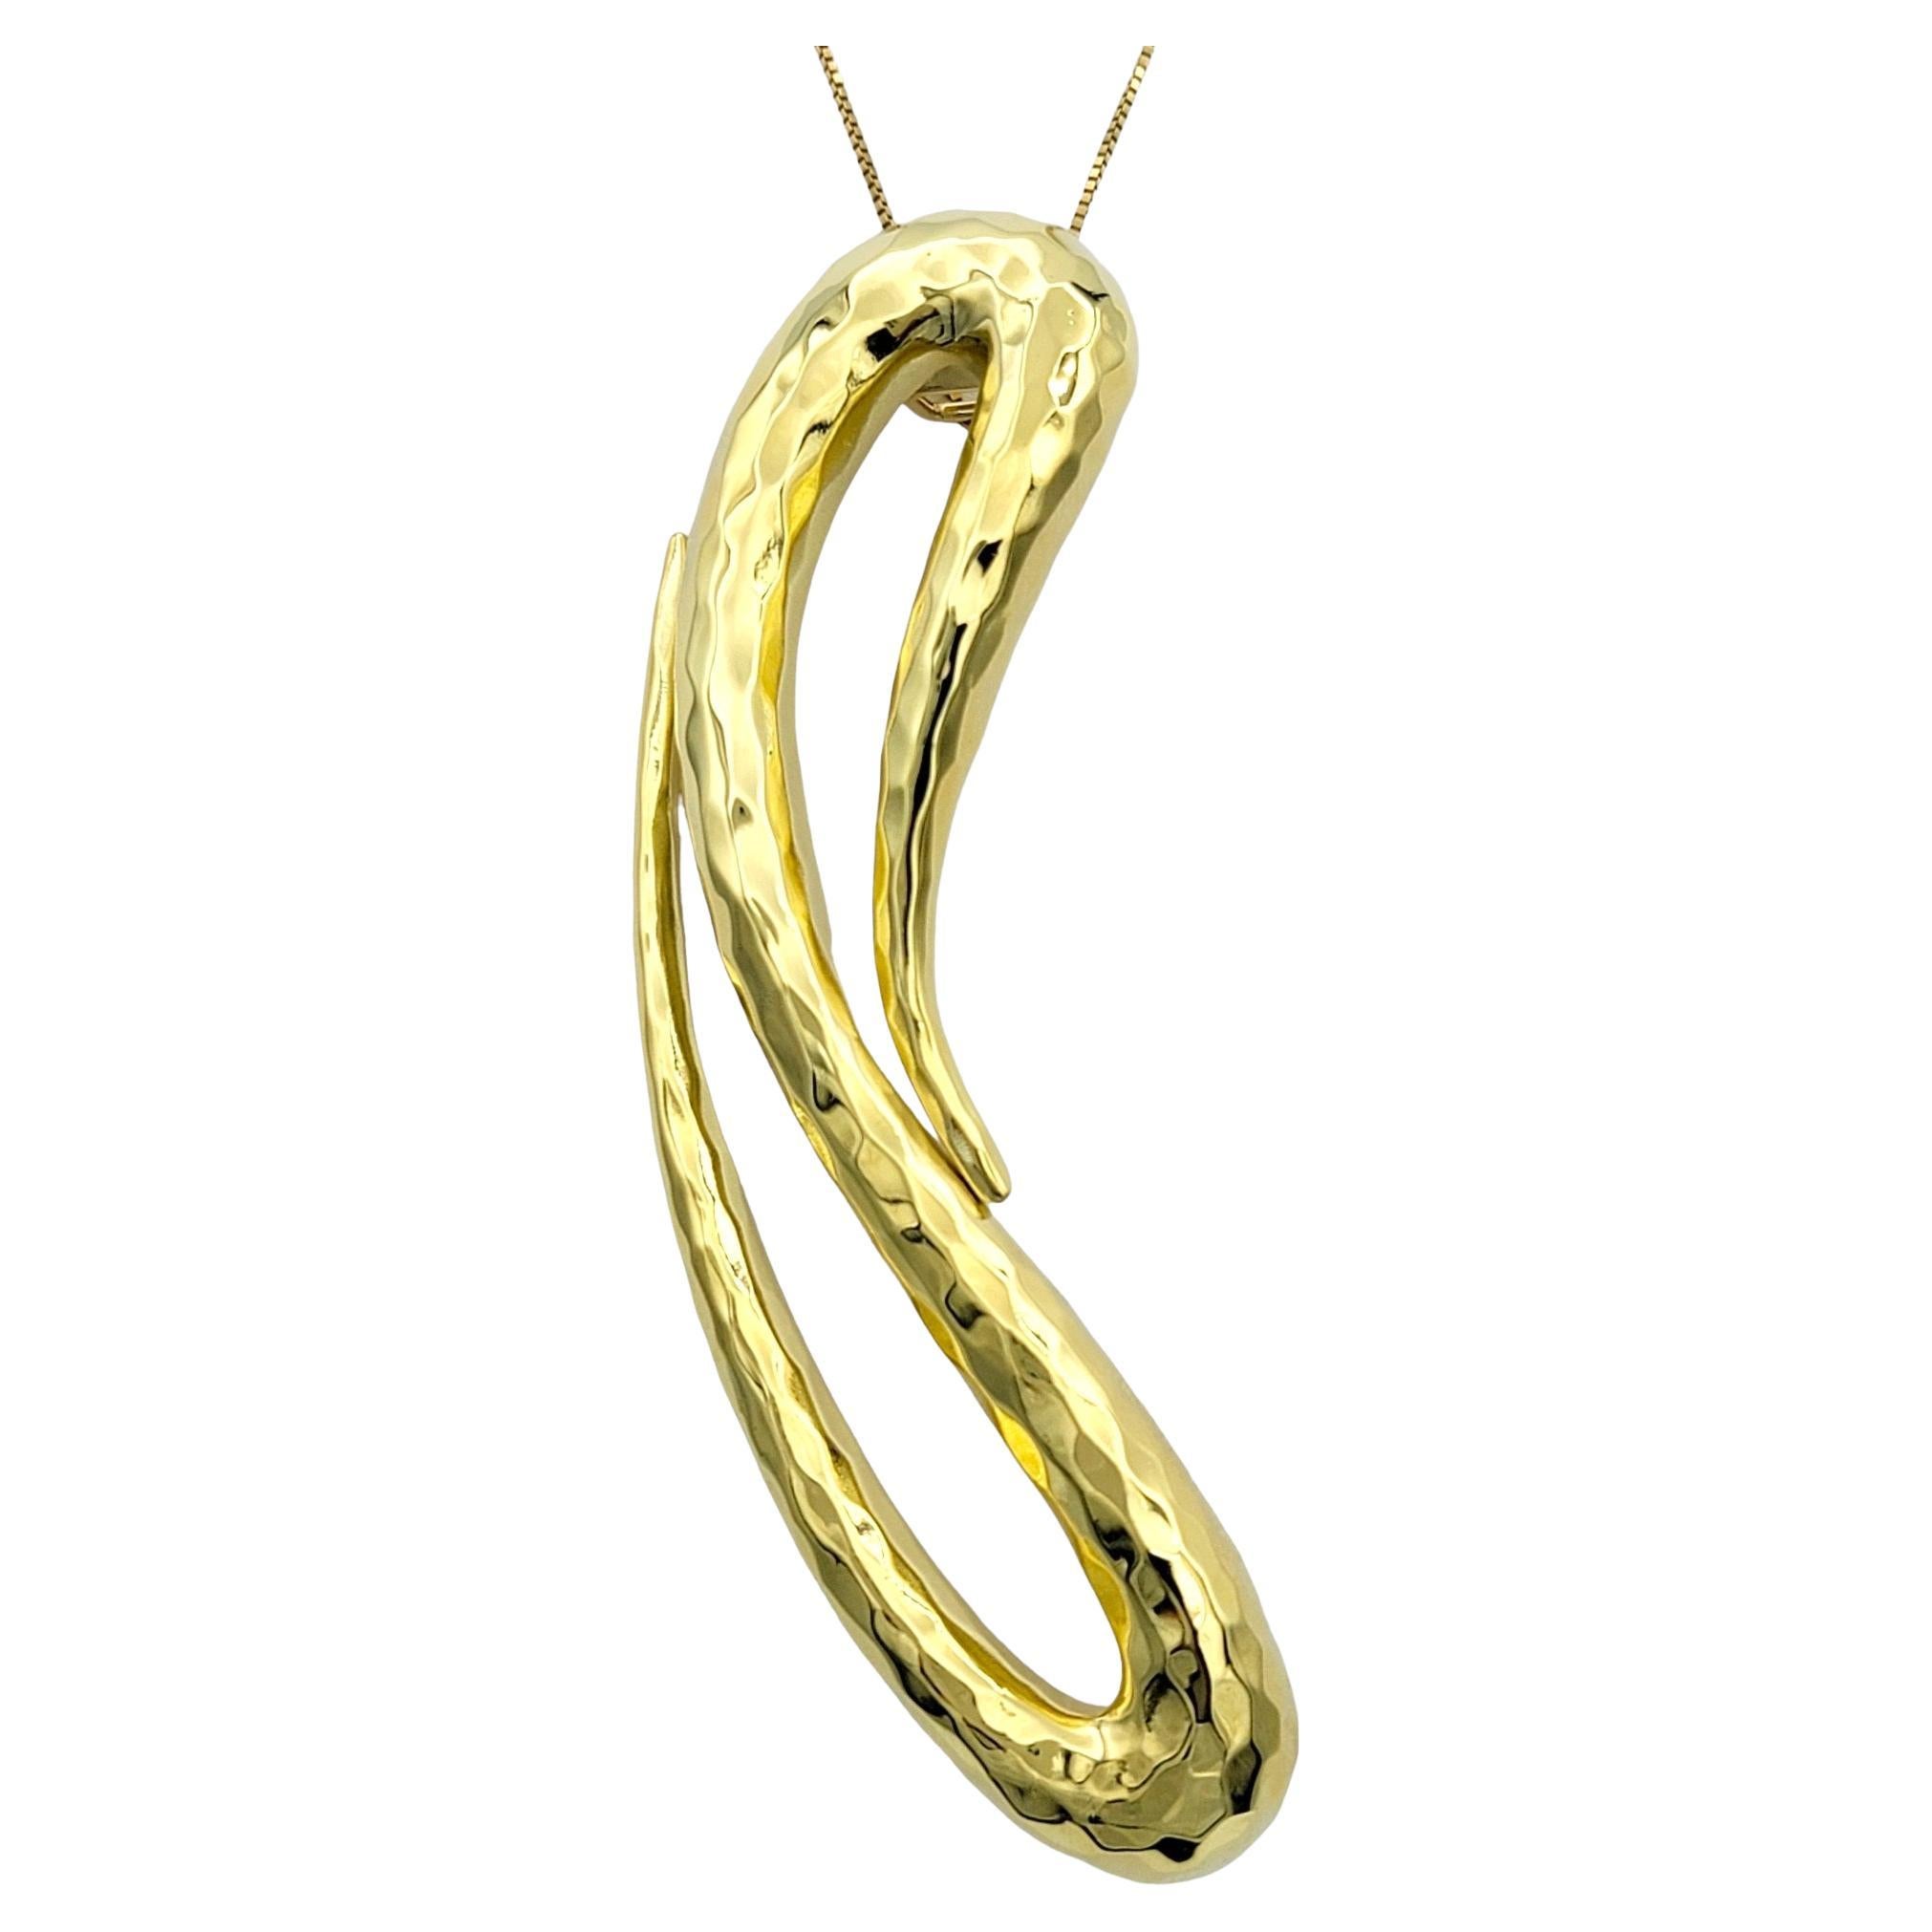 The Henry Dunay slider pendant is a masterful creation crafted in 18 karat yellow gold. Its distinctive smooth loop shape gives it a sense of fluidity and movement, while the hammered finish adds texture and depth to the piece.

This pendant